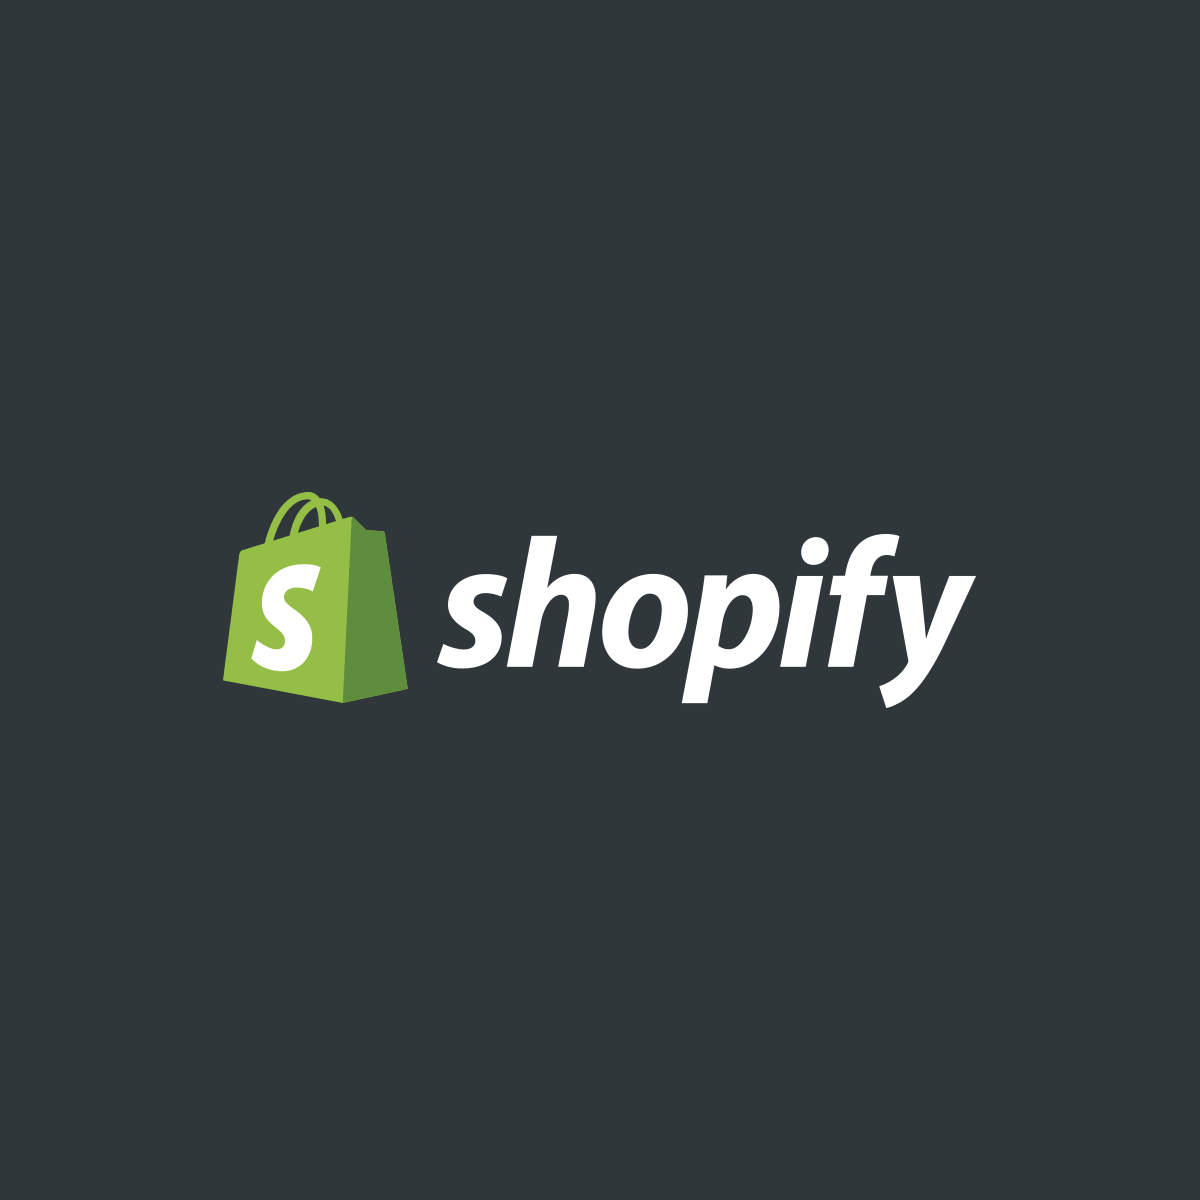 Shopify Png Hdpng.com 1200 - Shopify, Transparent background PNG HD thumbnail